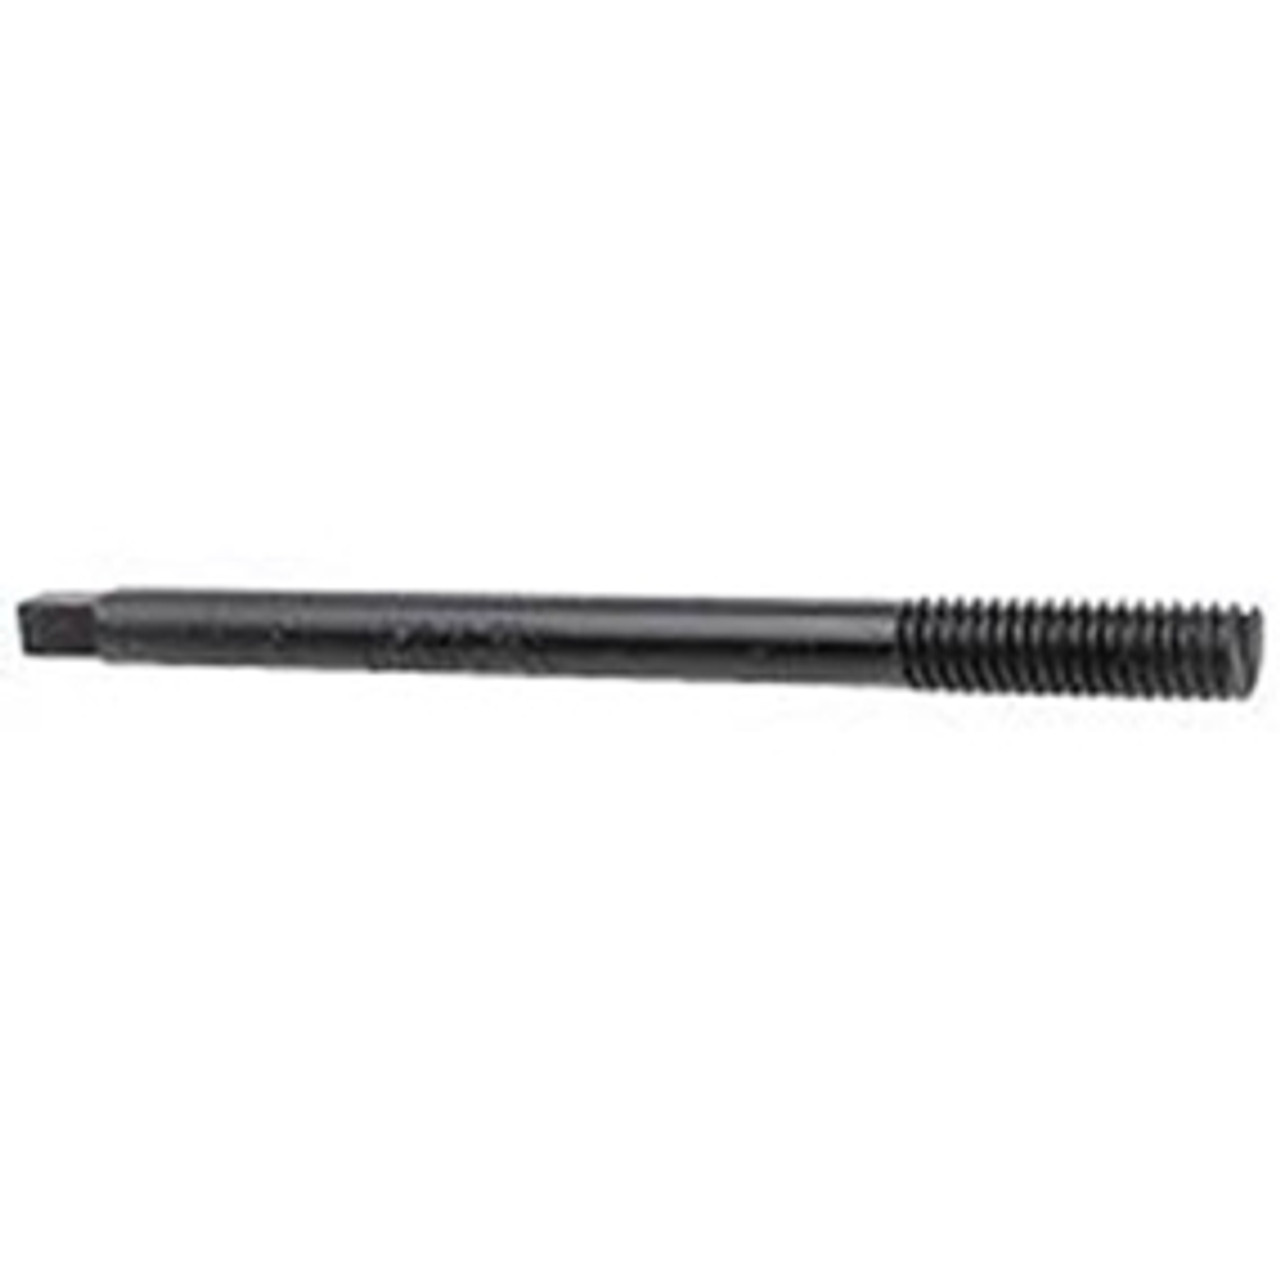 1/2"-13 Helicoil Installation Tool  2288-8